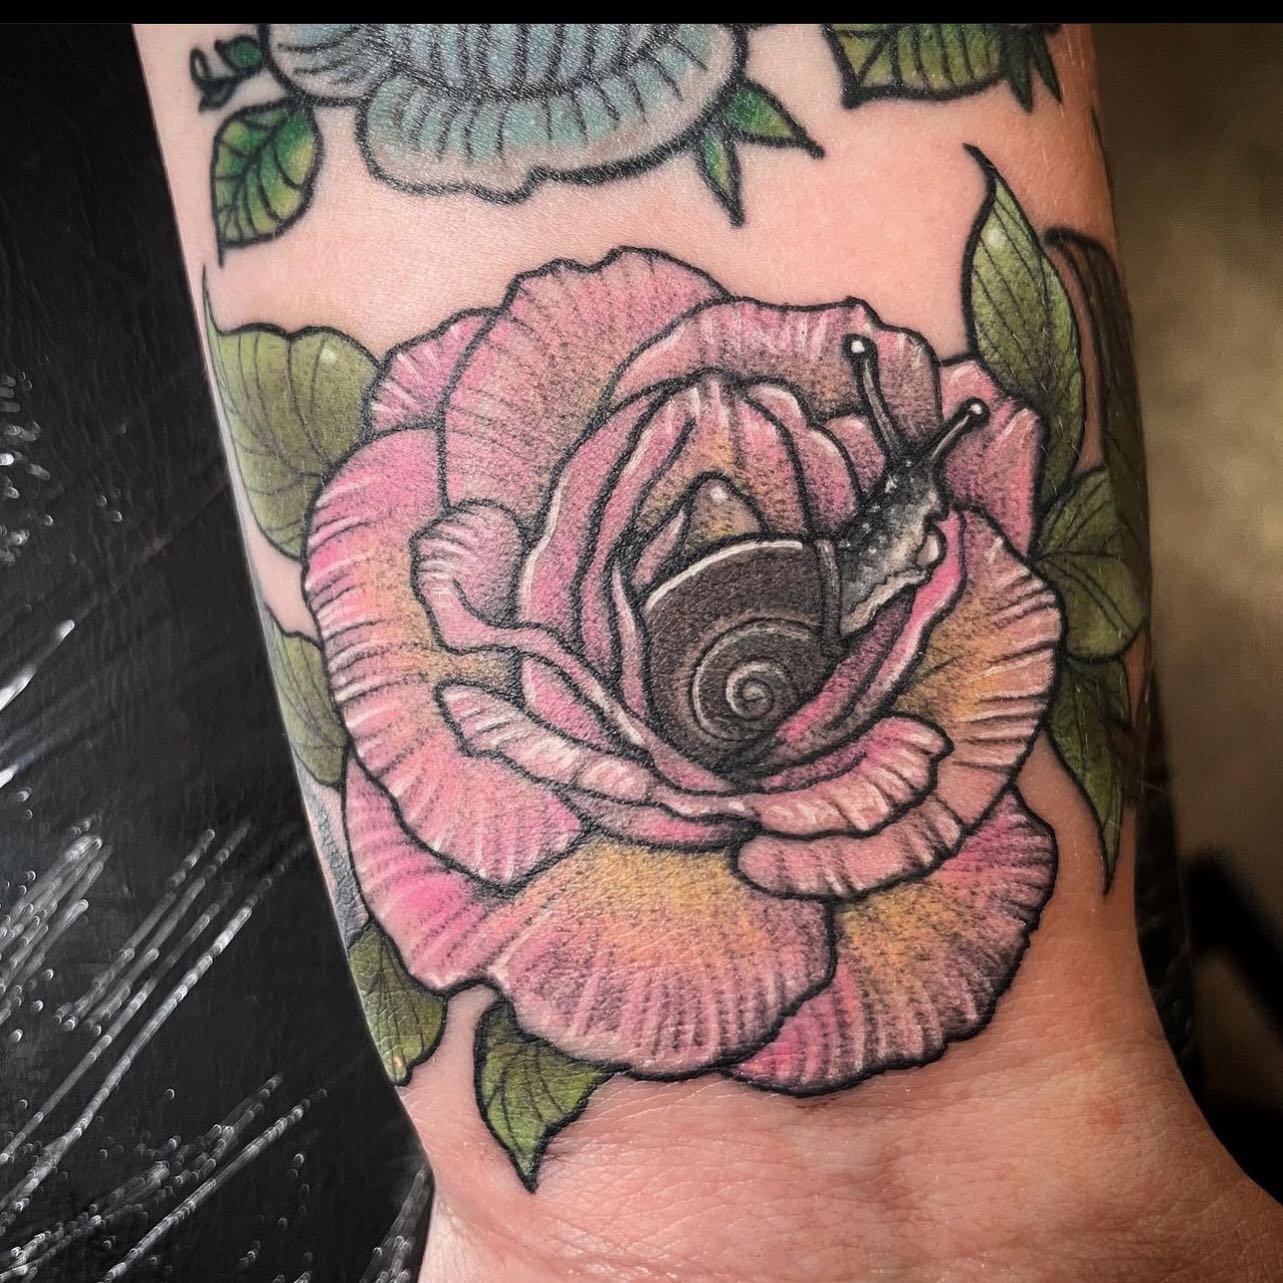 Tattoo by @kayliemorbidart 🖤🖤🖤 Kaylie has some availability this week. Follow the guidelines on her page for booking and check out the new designs she posted today as well 🖤
.
.
.
.
.
.

#talontattoowsnc #tattoo #colortattoo #rose #rosetattoo #ba